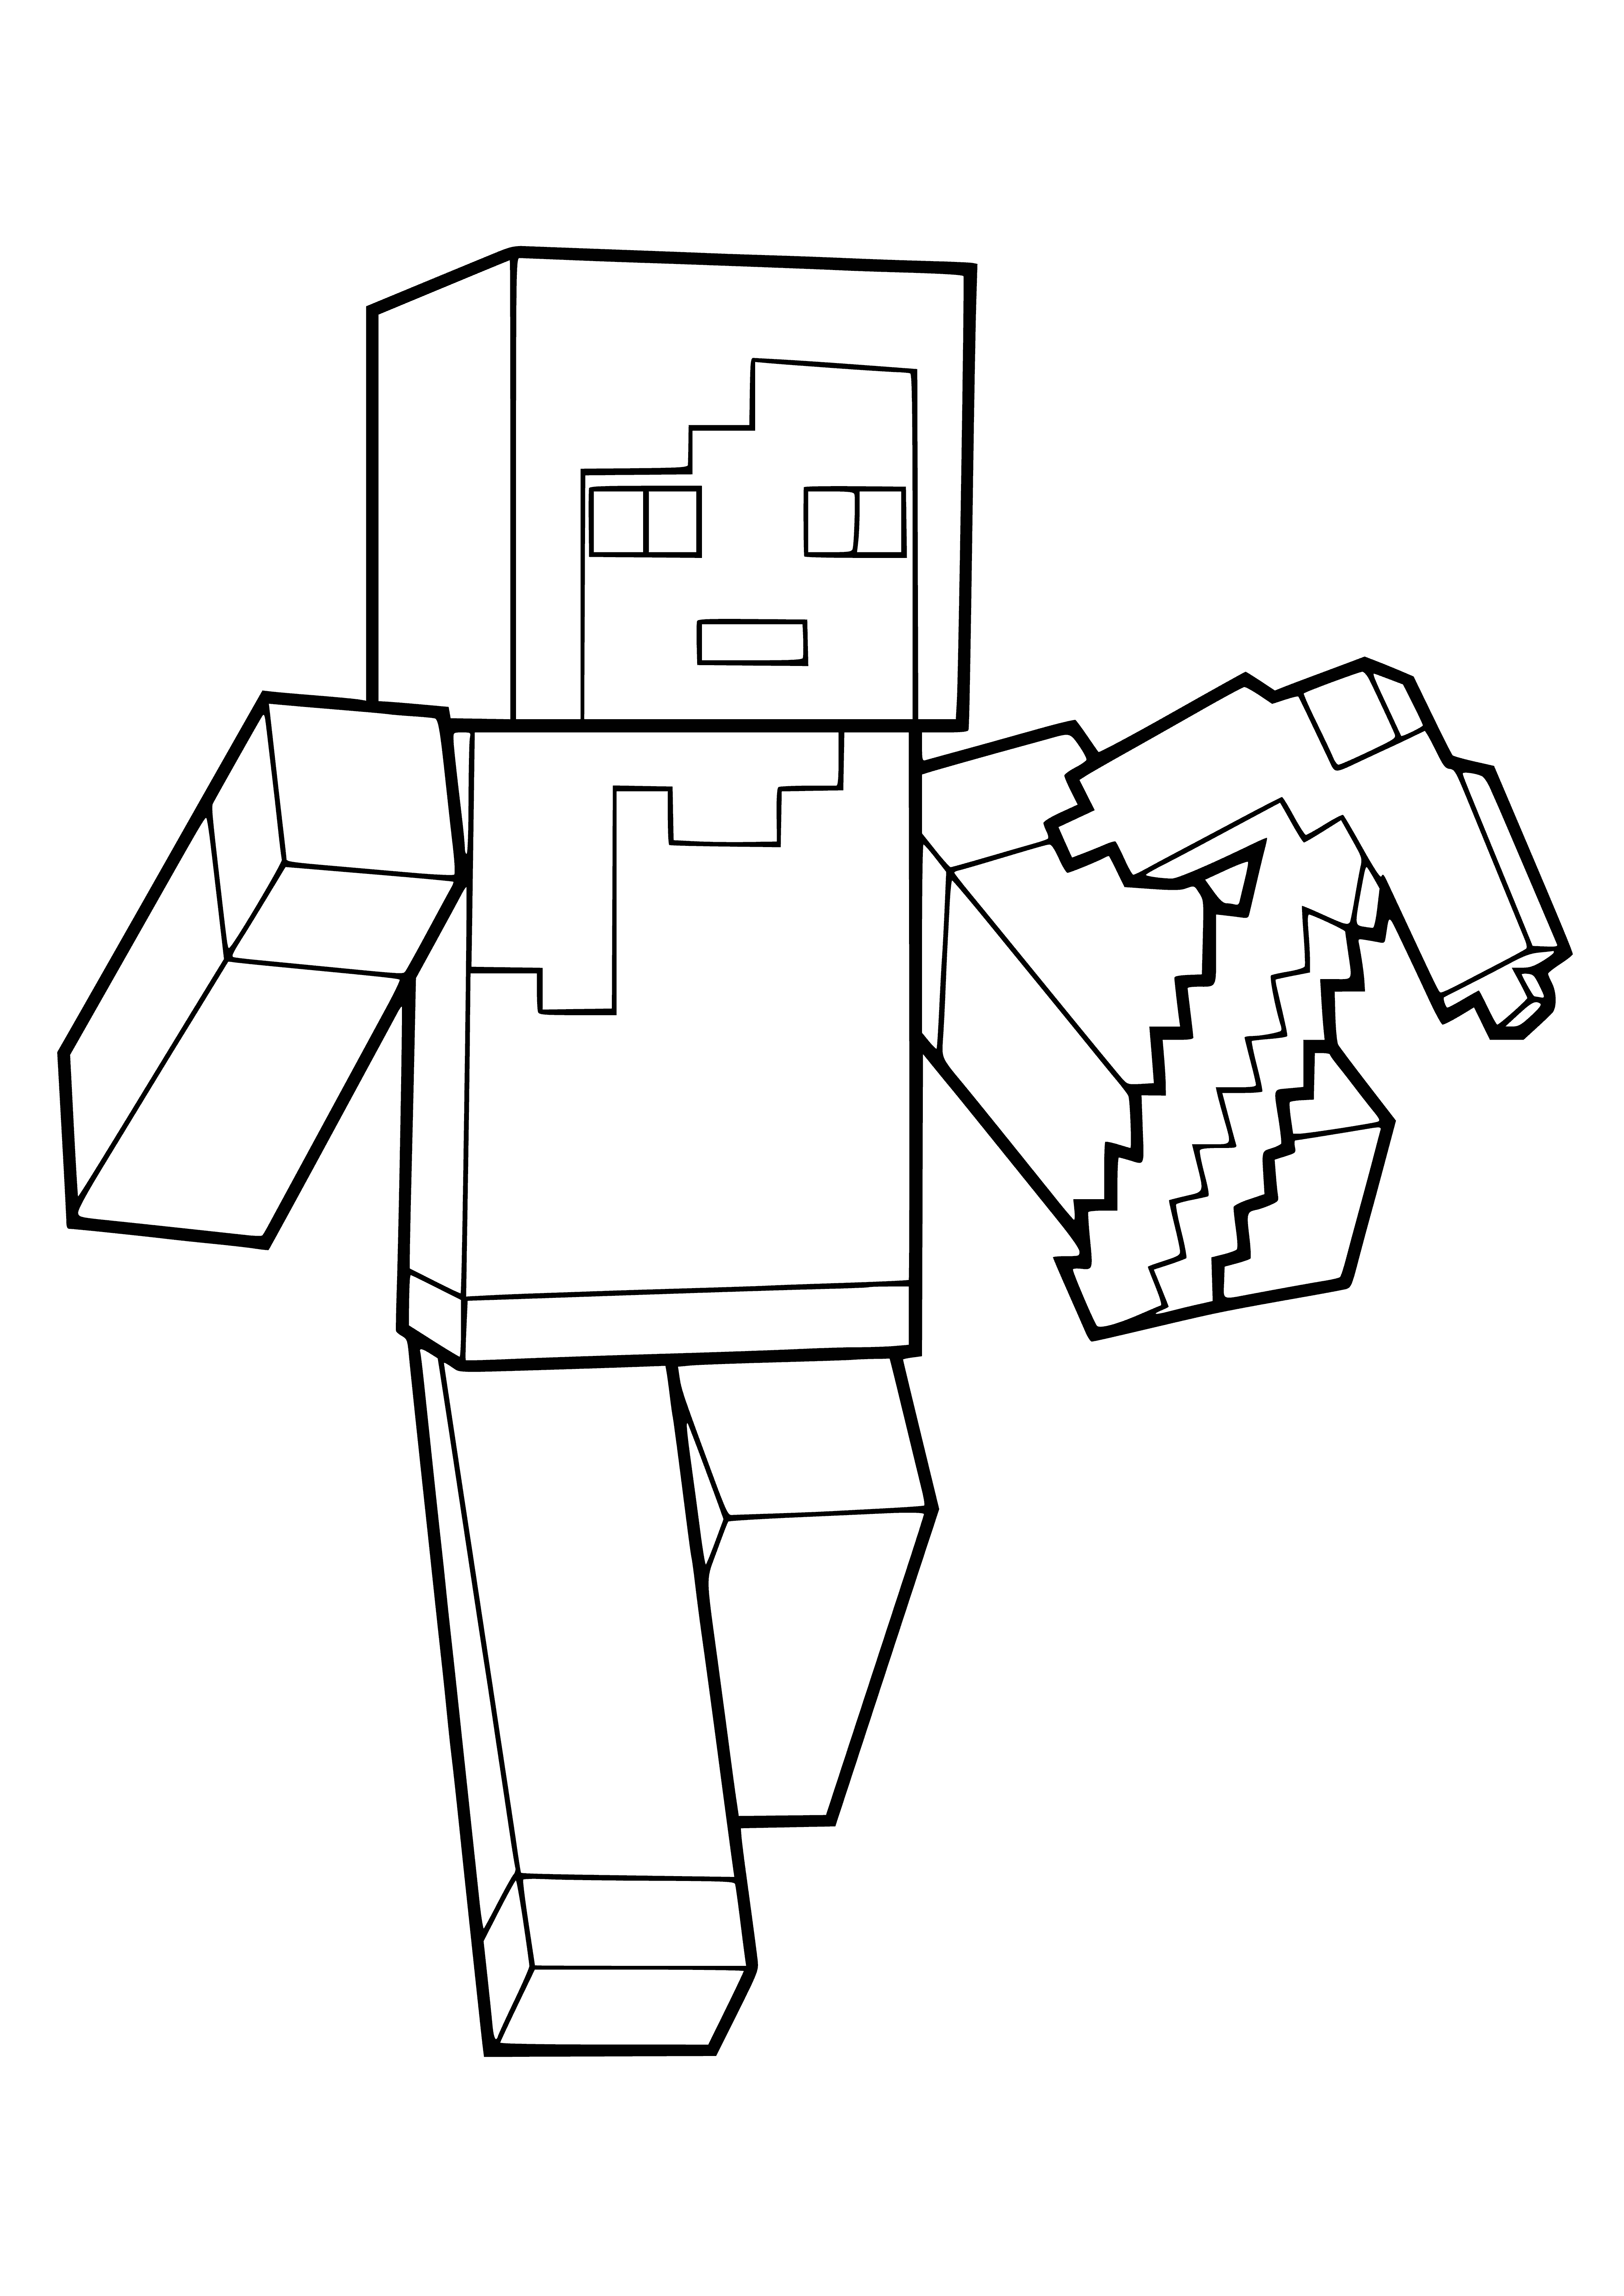 Alex with a pickaxe coloring page